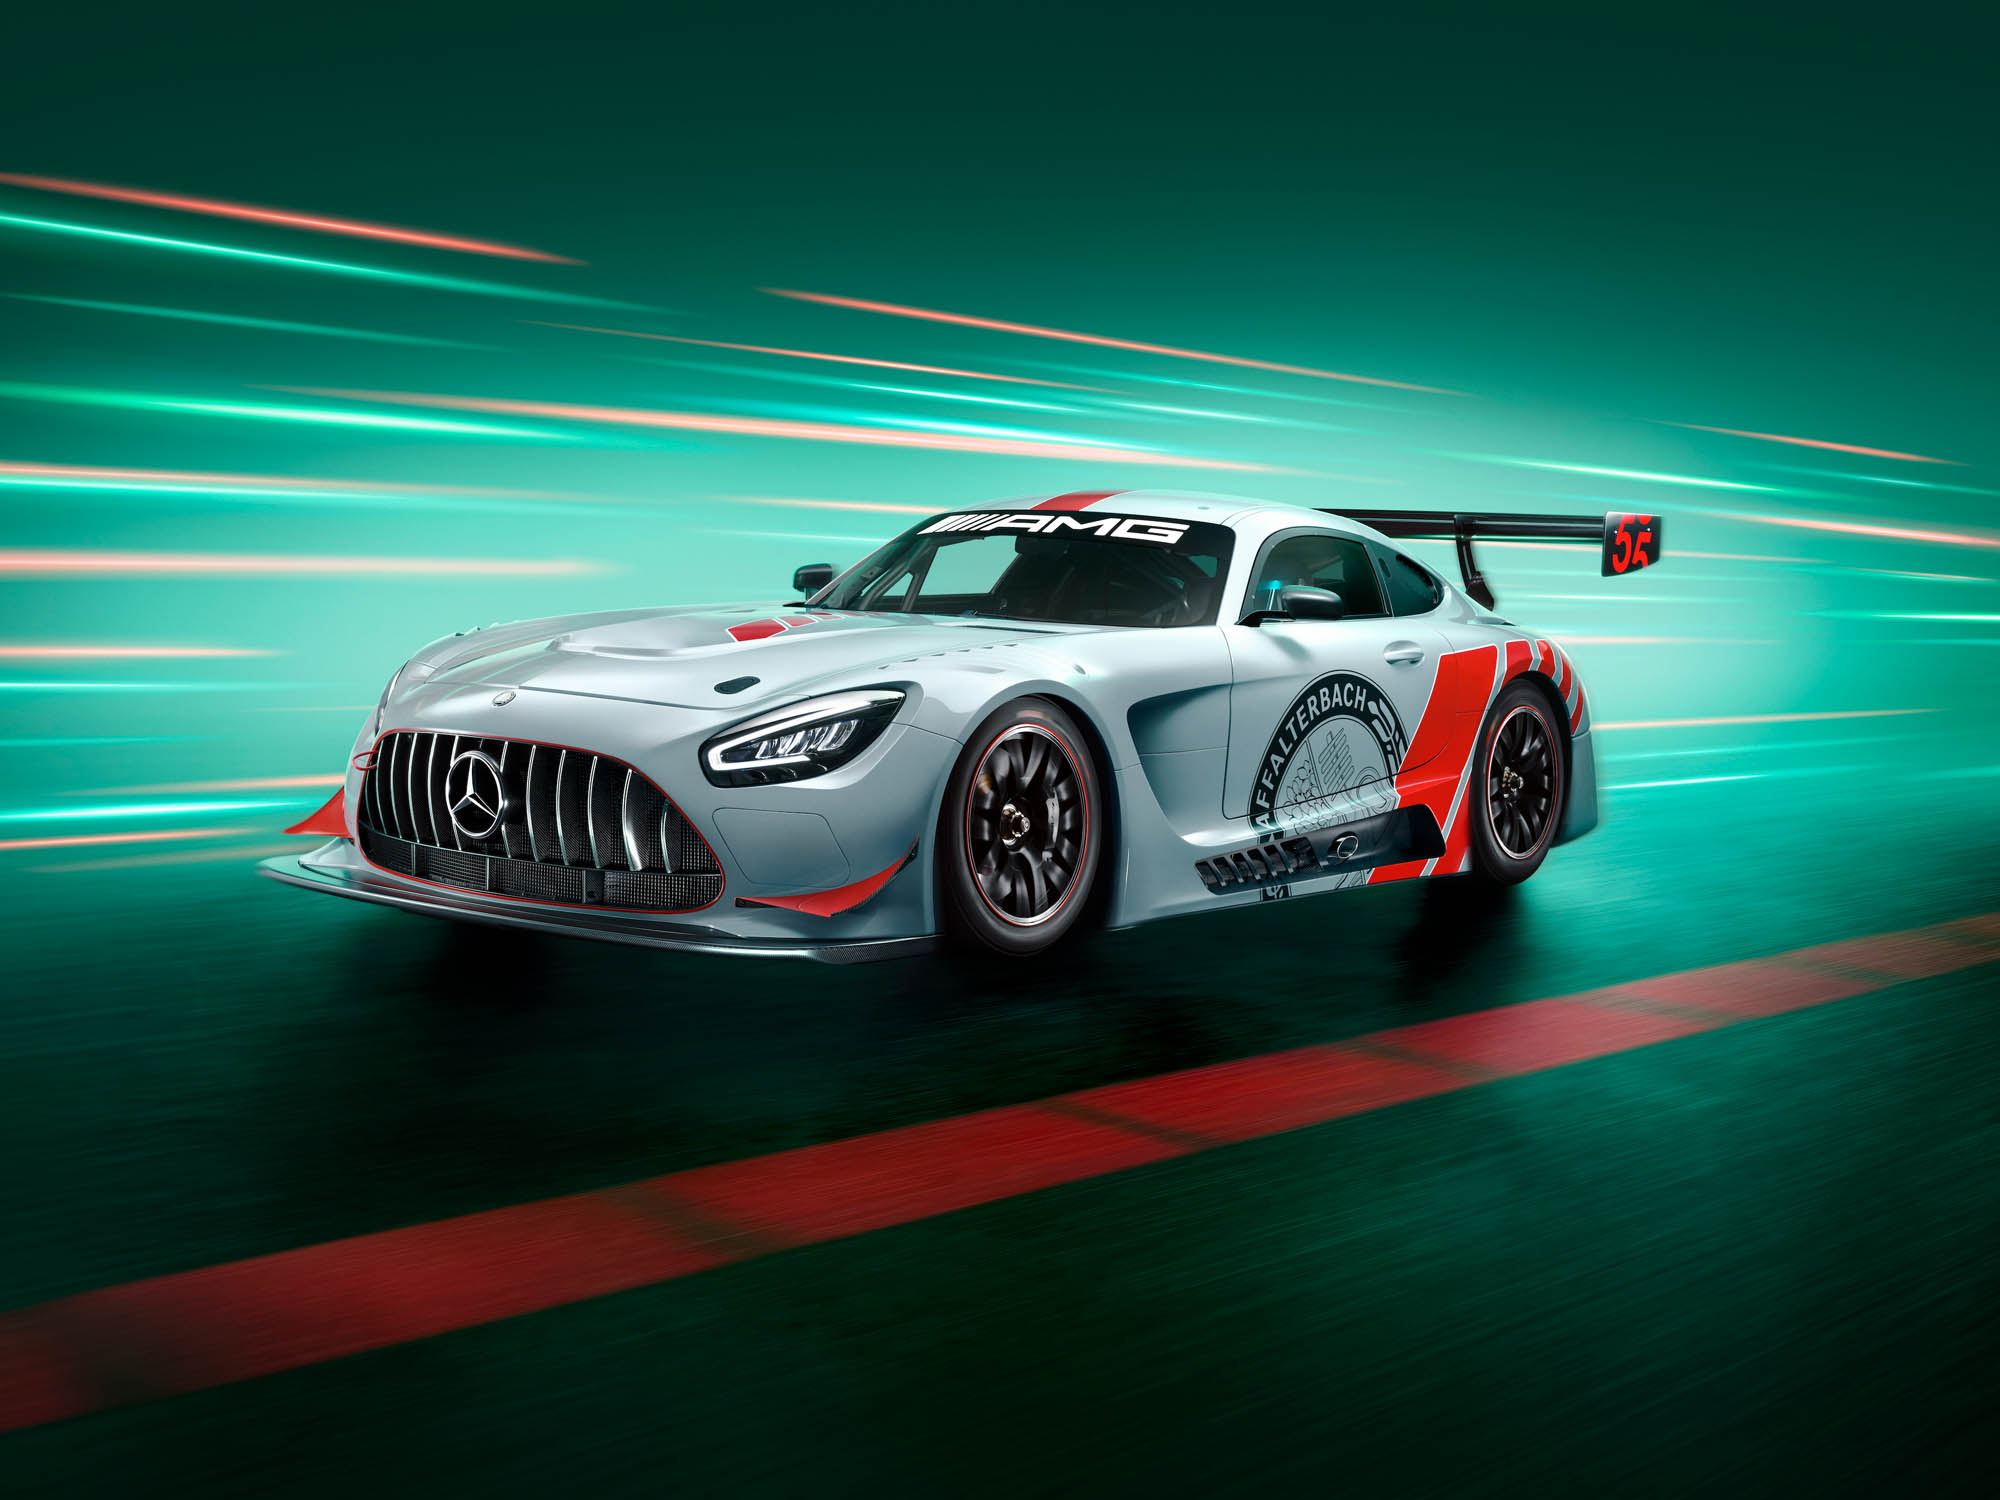 Mercedes-AMG GT3 EDITION-55-Sondermodell Mercedes-AMG GT3 EDITION 55 special series